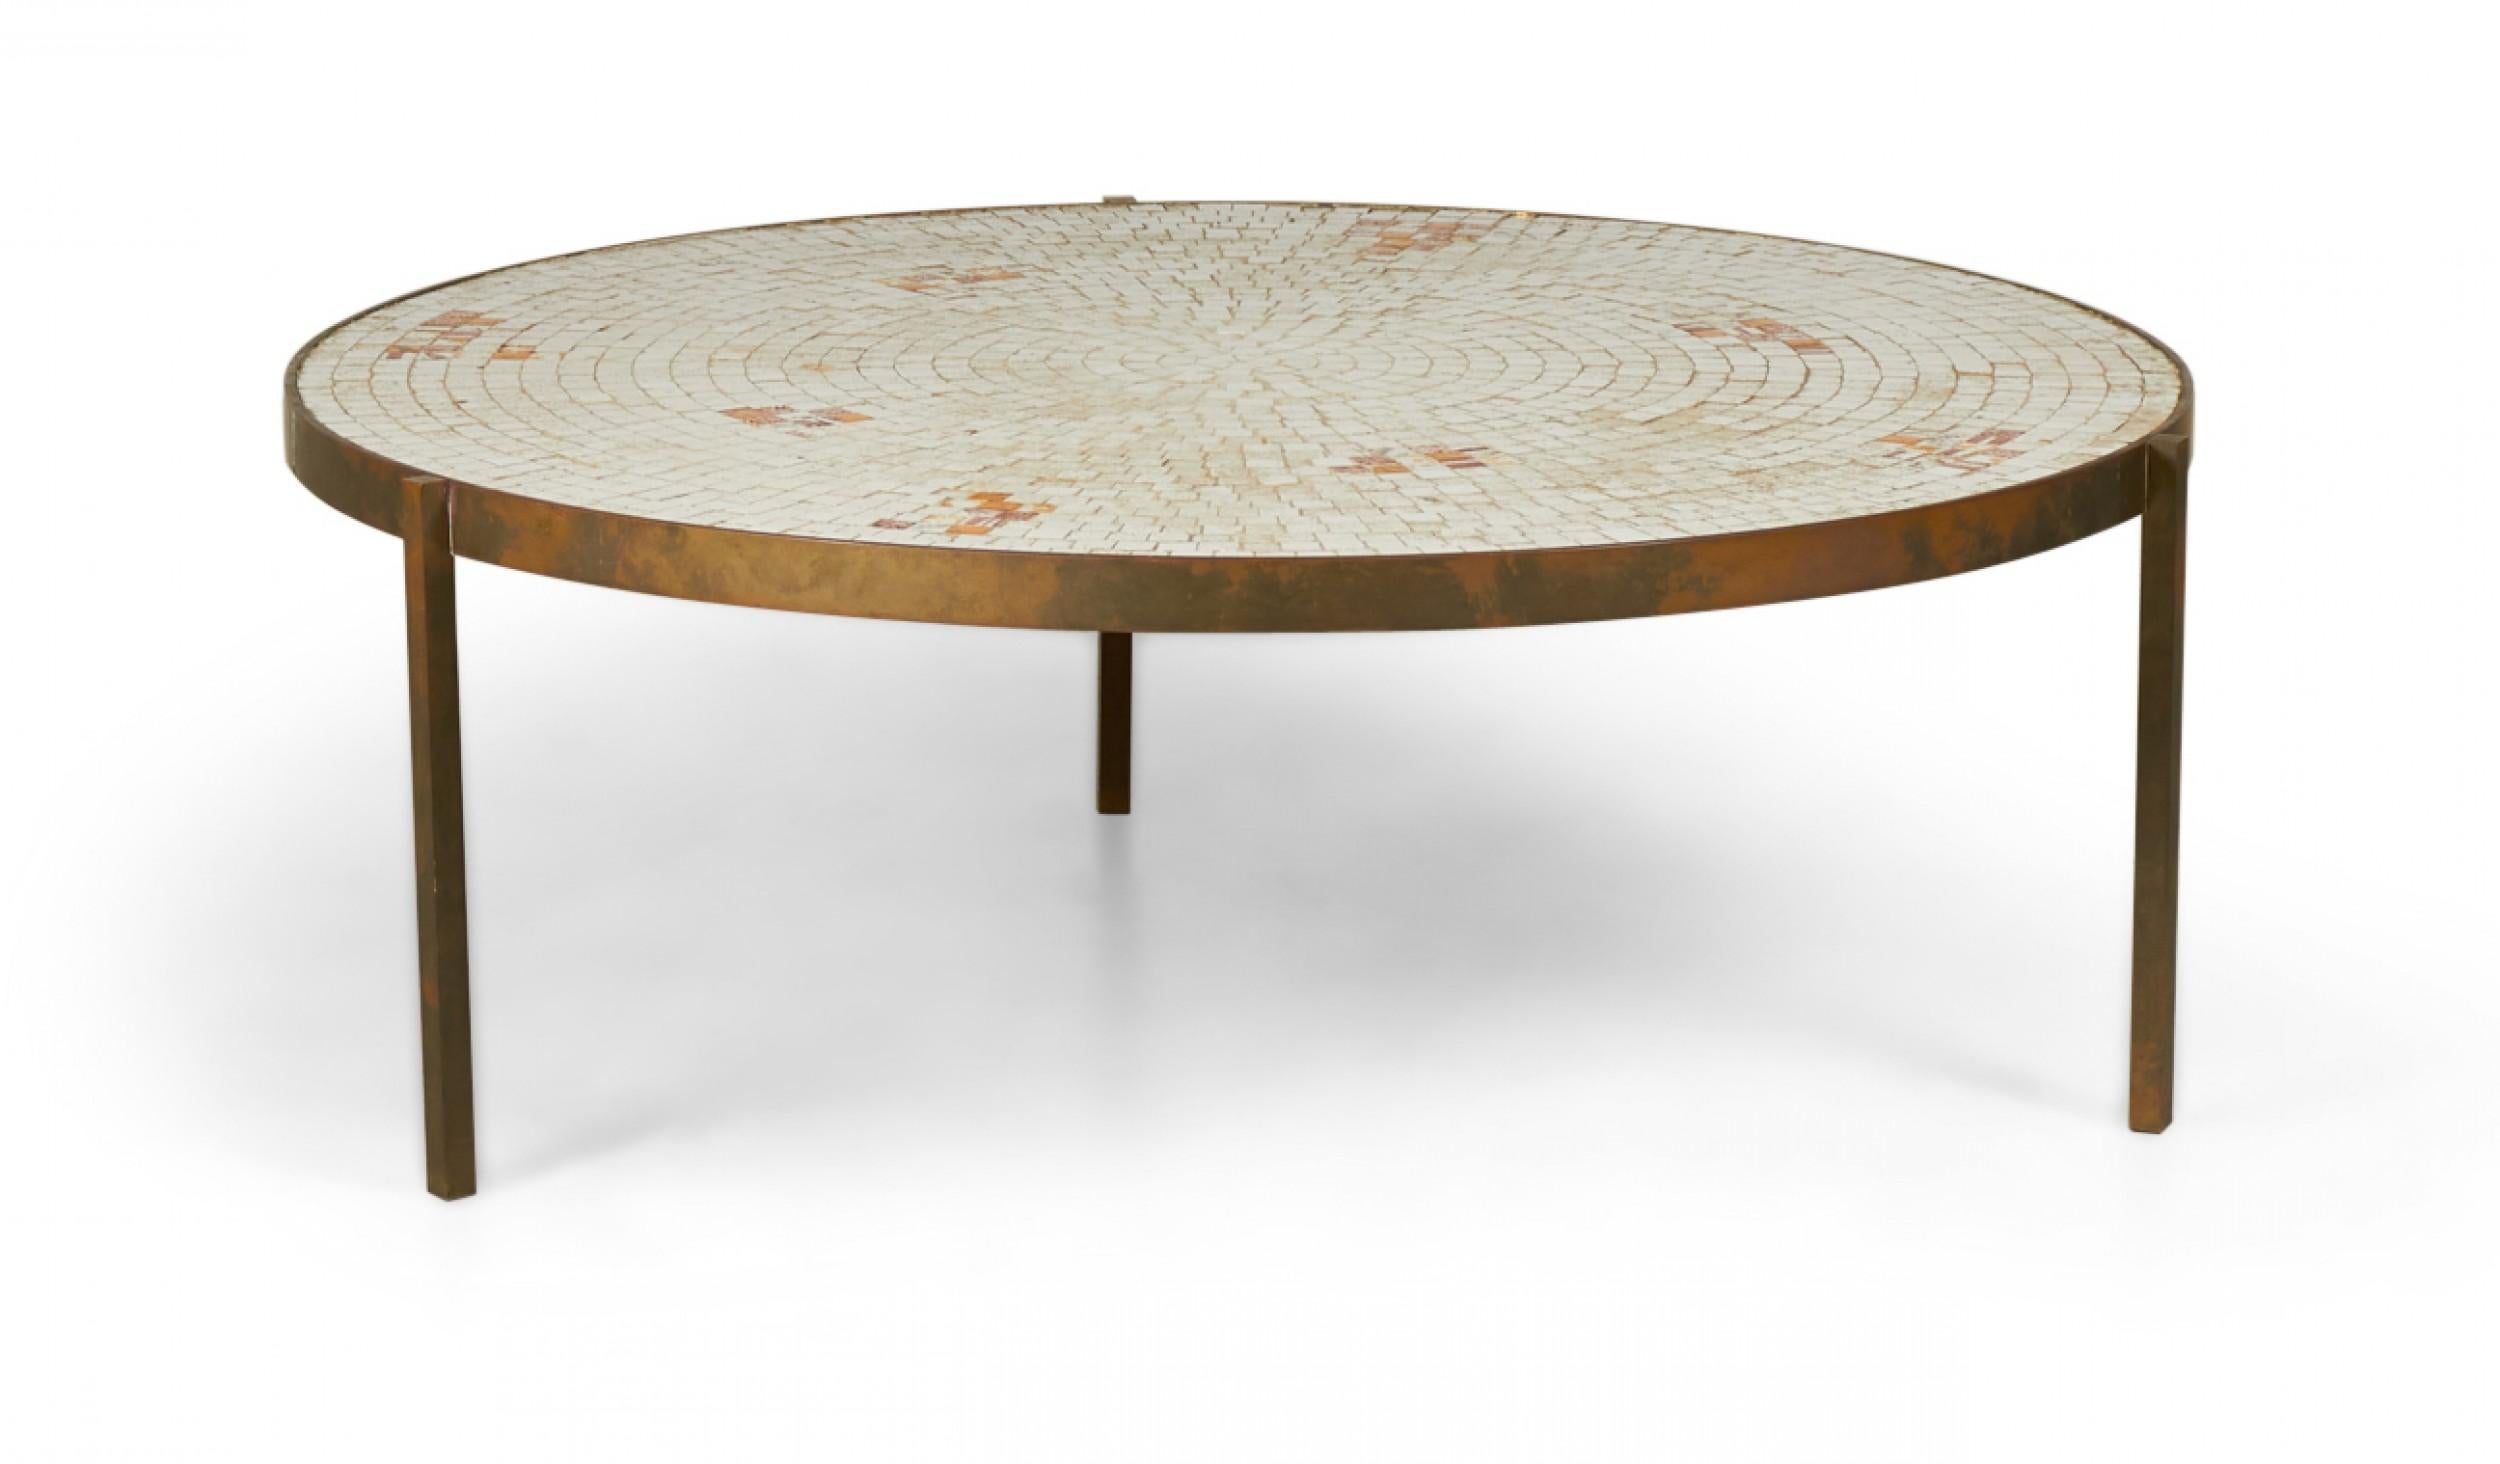 American mid-century circular coffee / cocktail table with a beige and orange mosaic tile top supported by a brass frame with three legs.